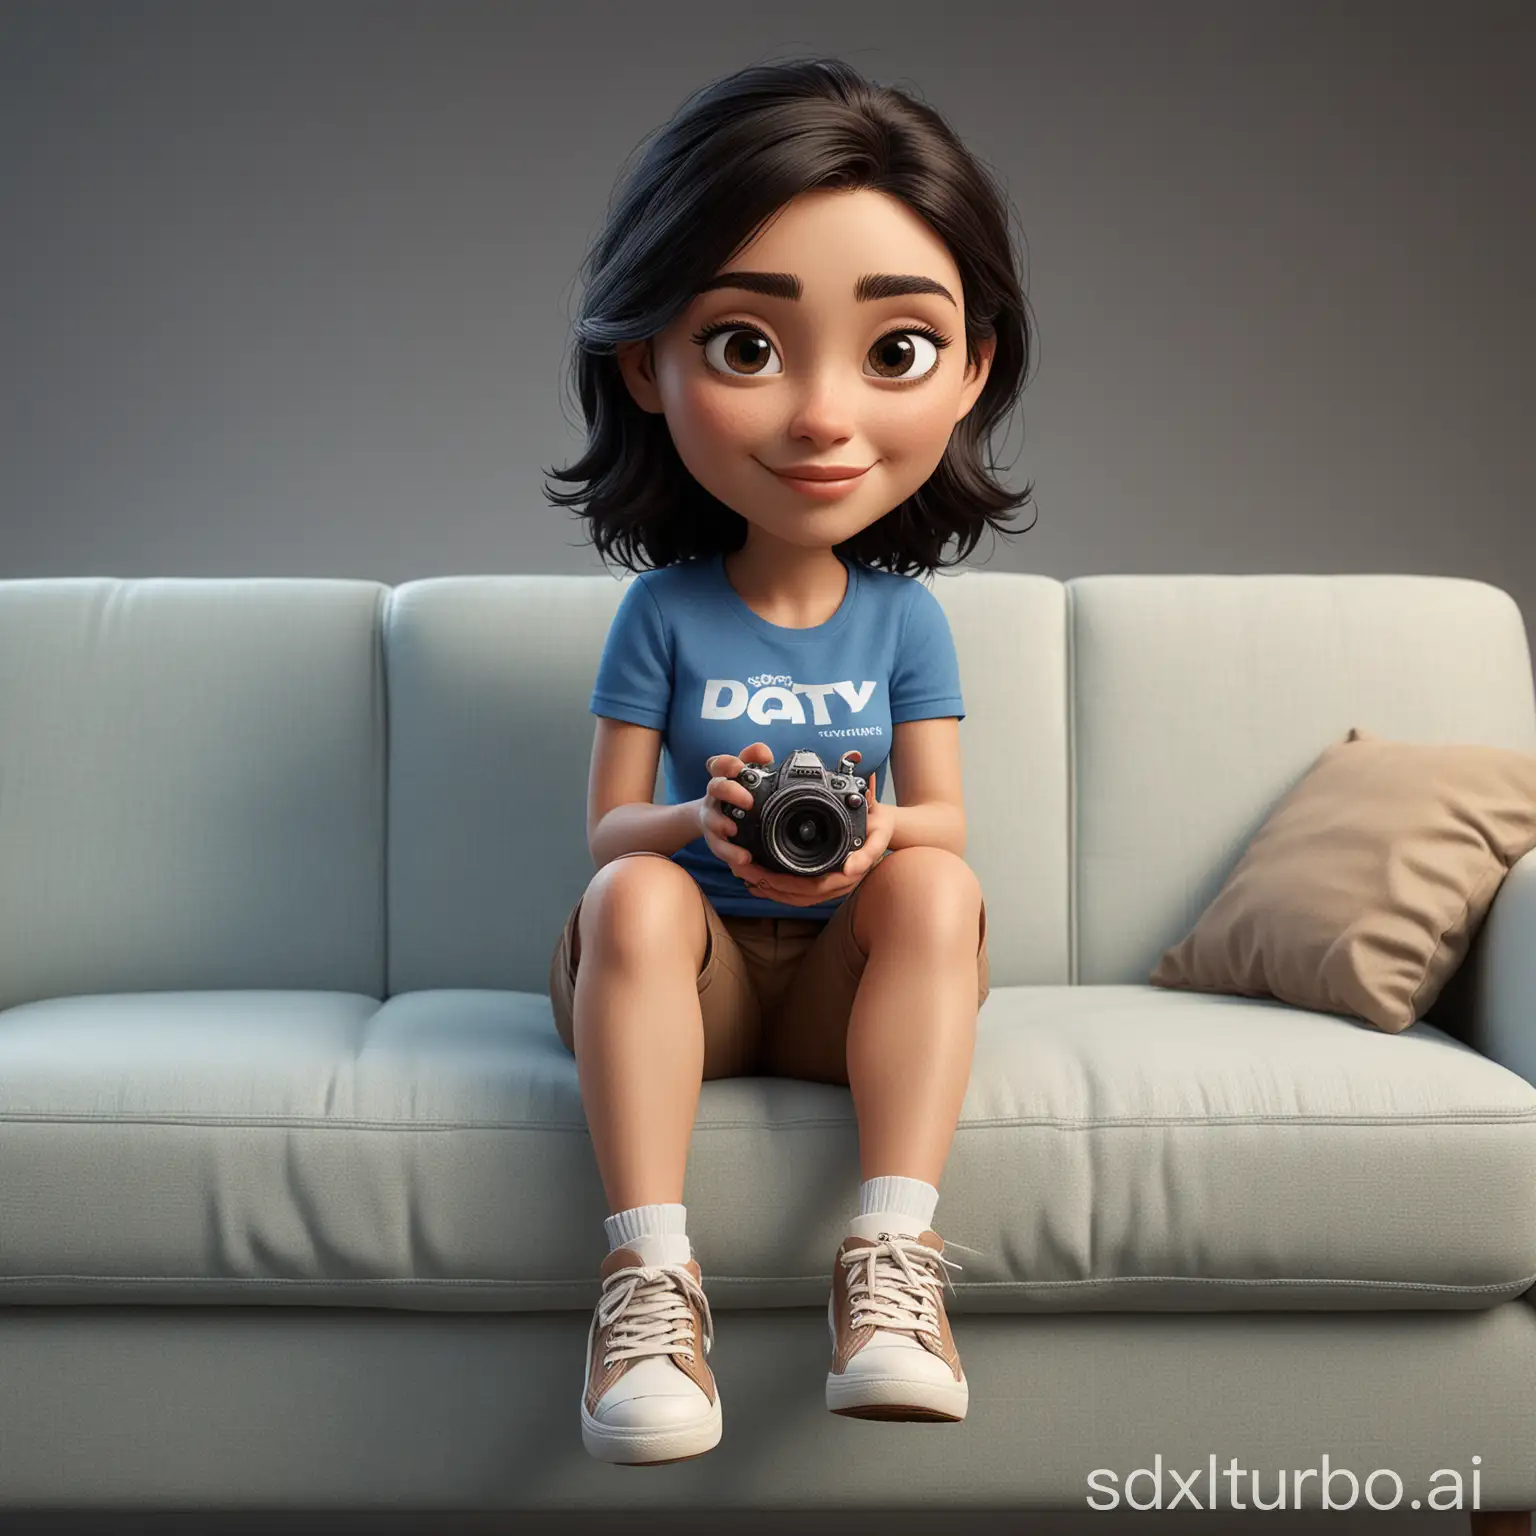 Relaxed-Woman-with-Camera-in-Disney-Pixar-Style-on-Ivory-White-Sofa